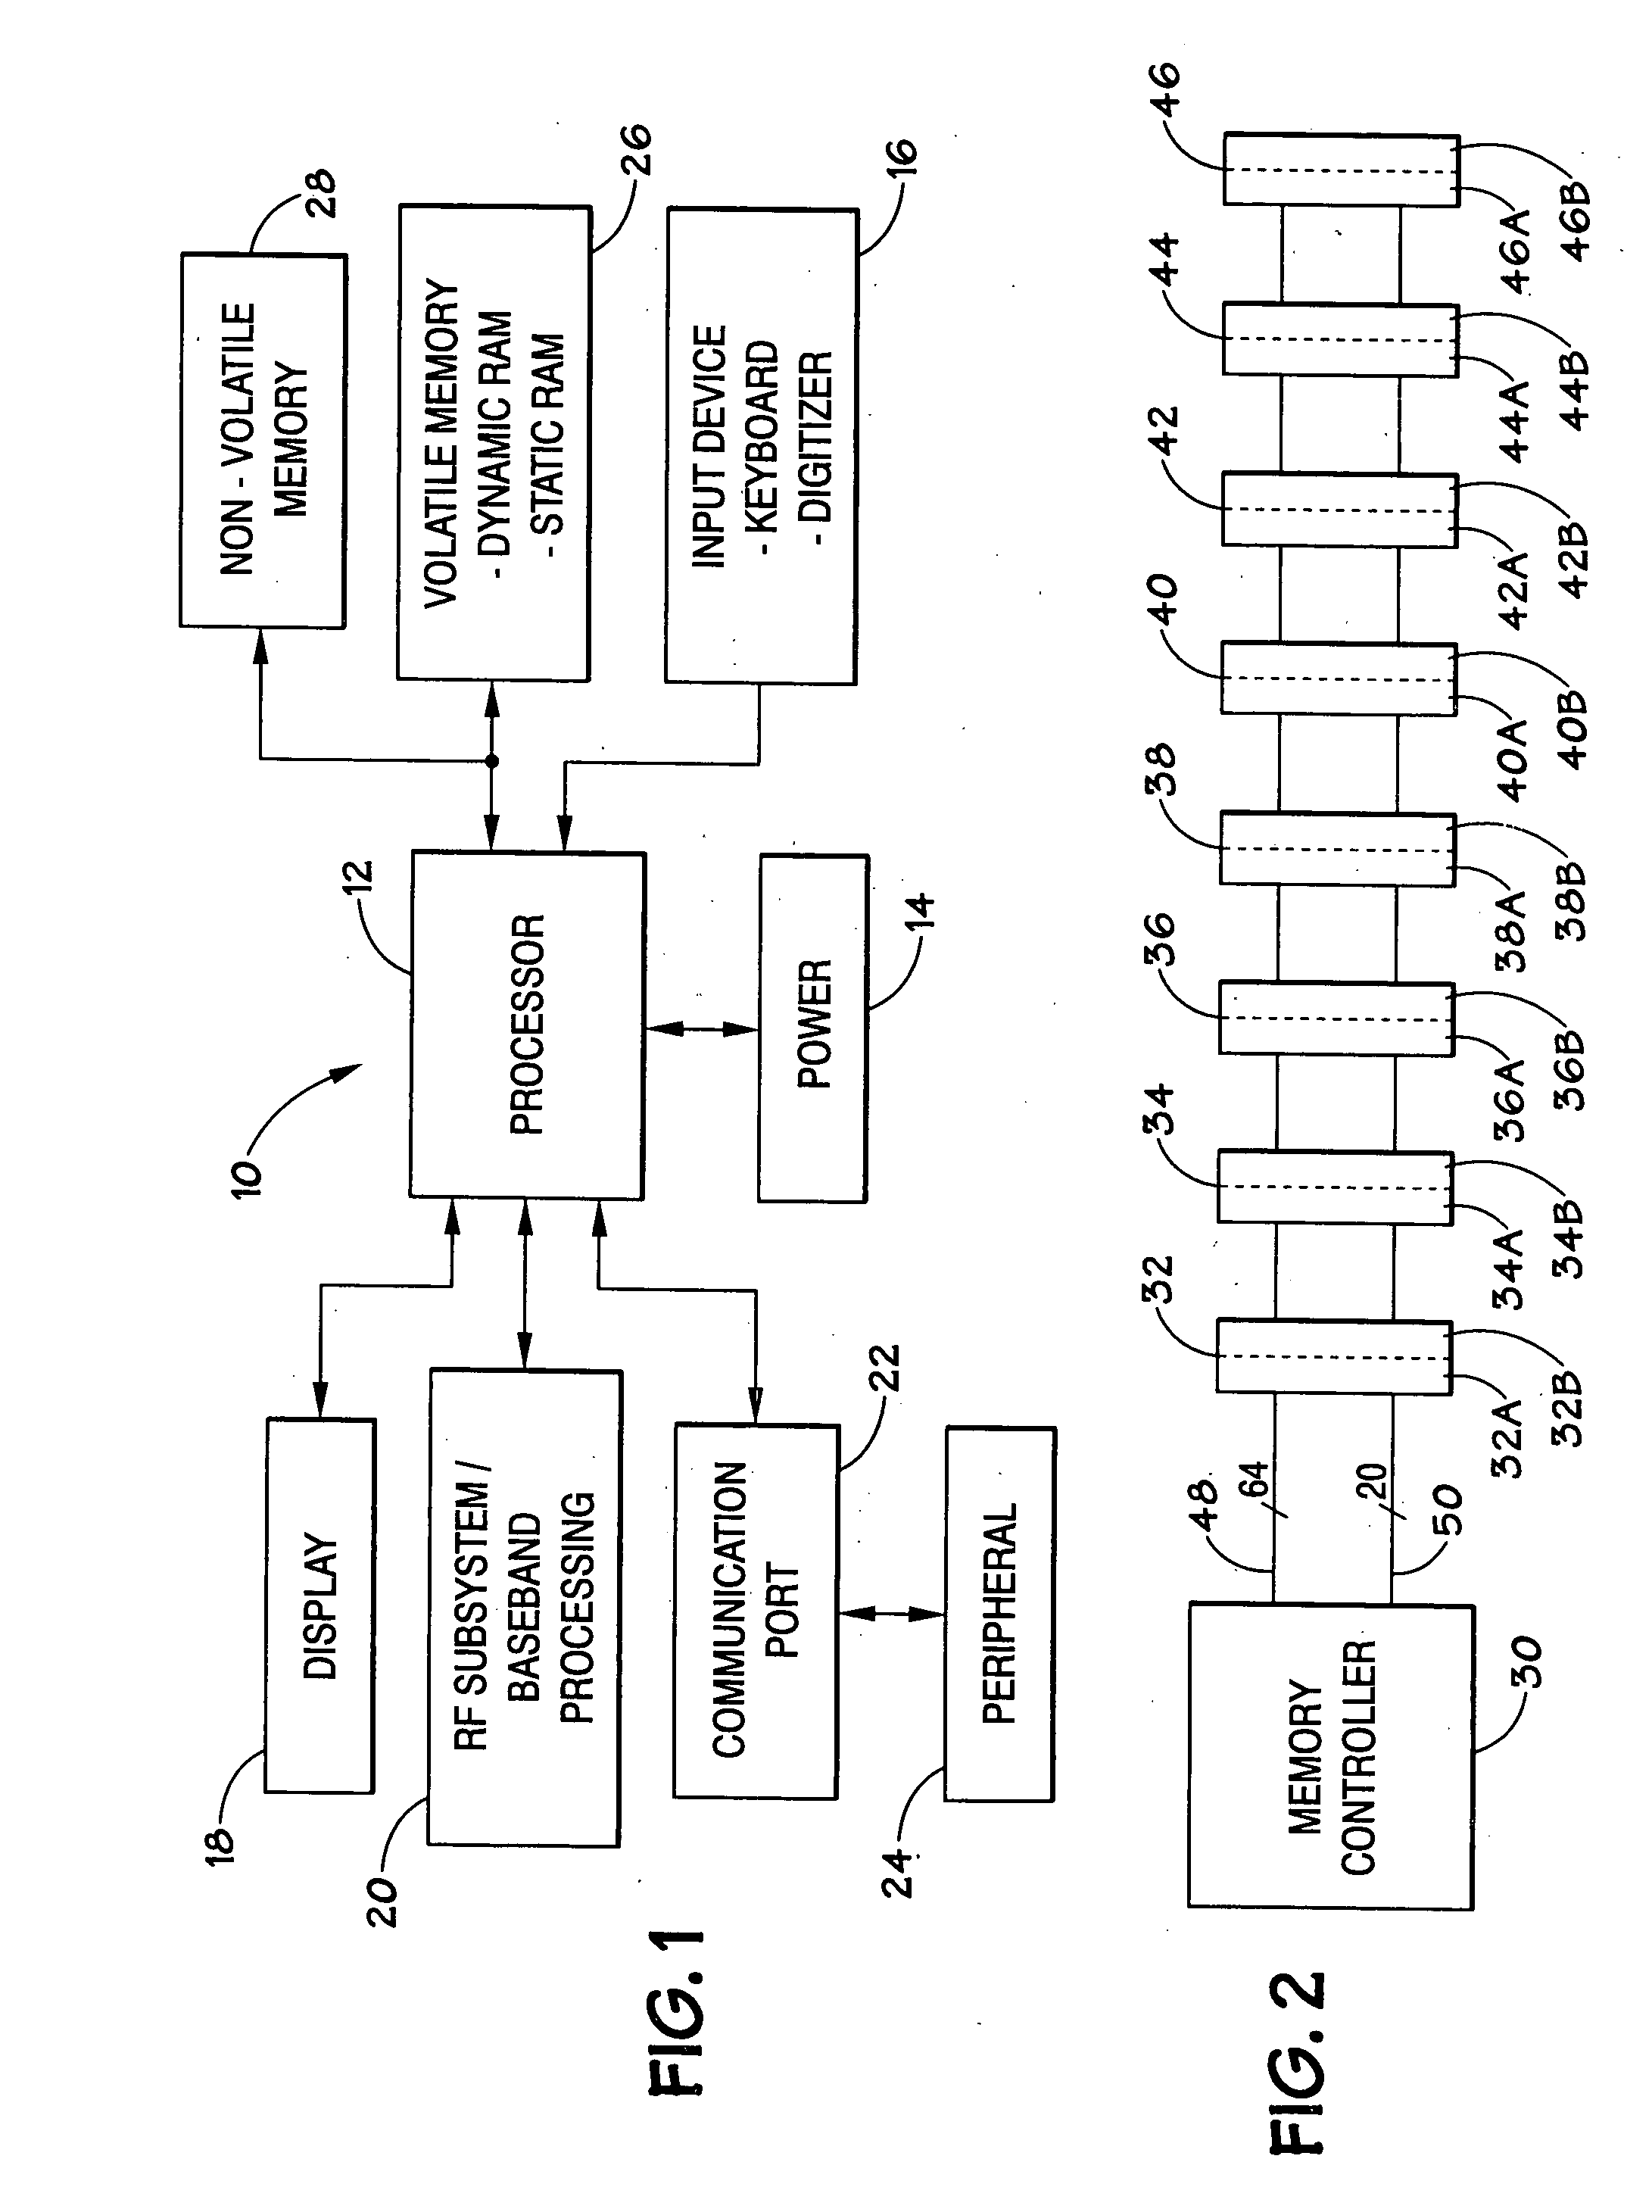 Configurable inputs and outputs for memory stacking system and method